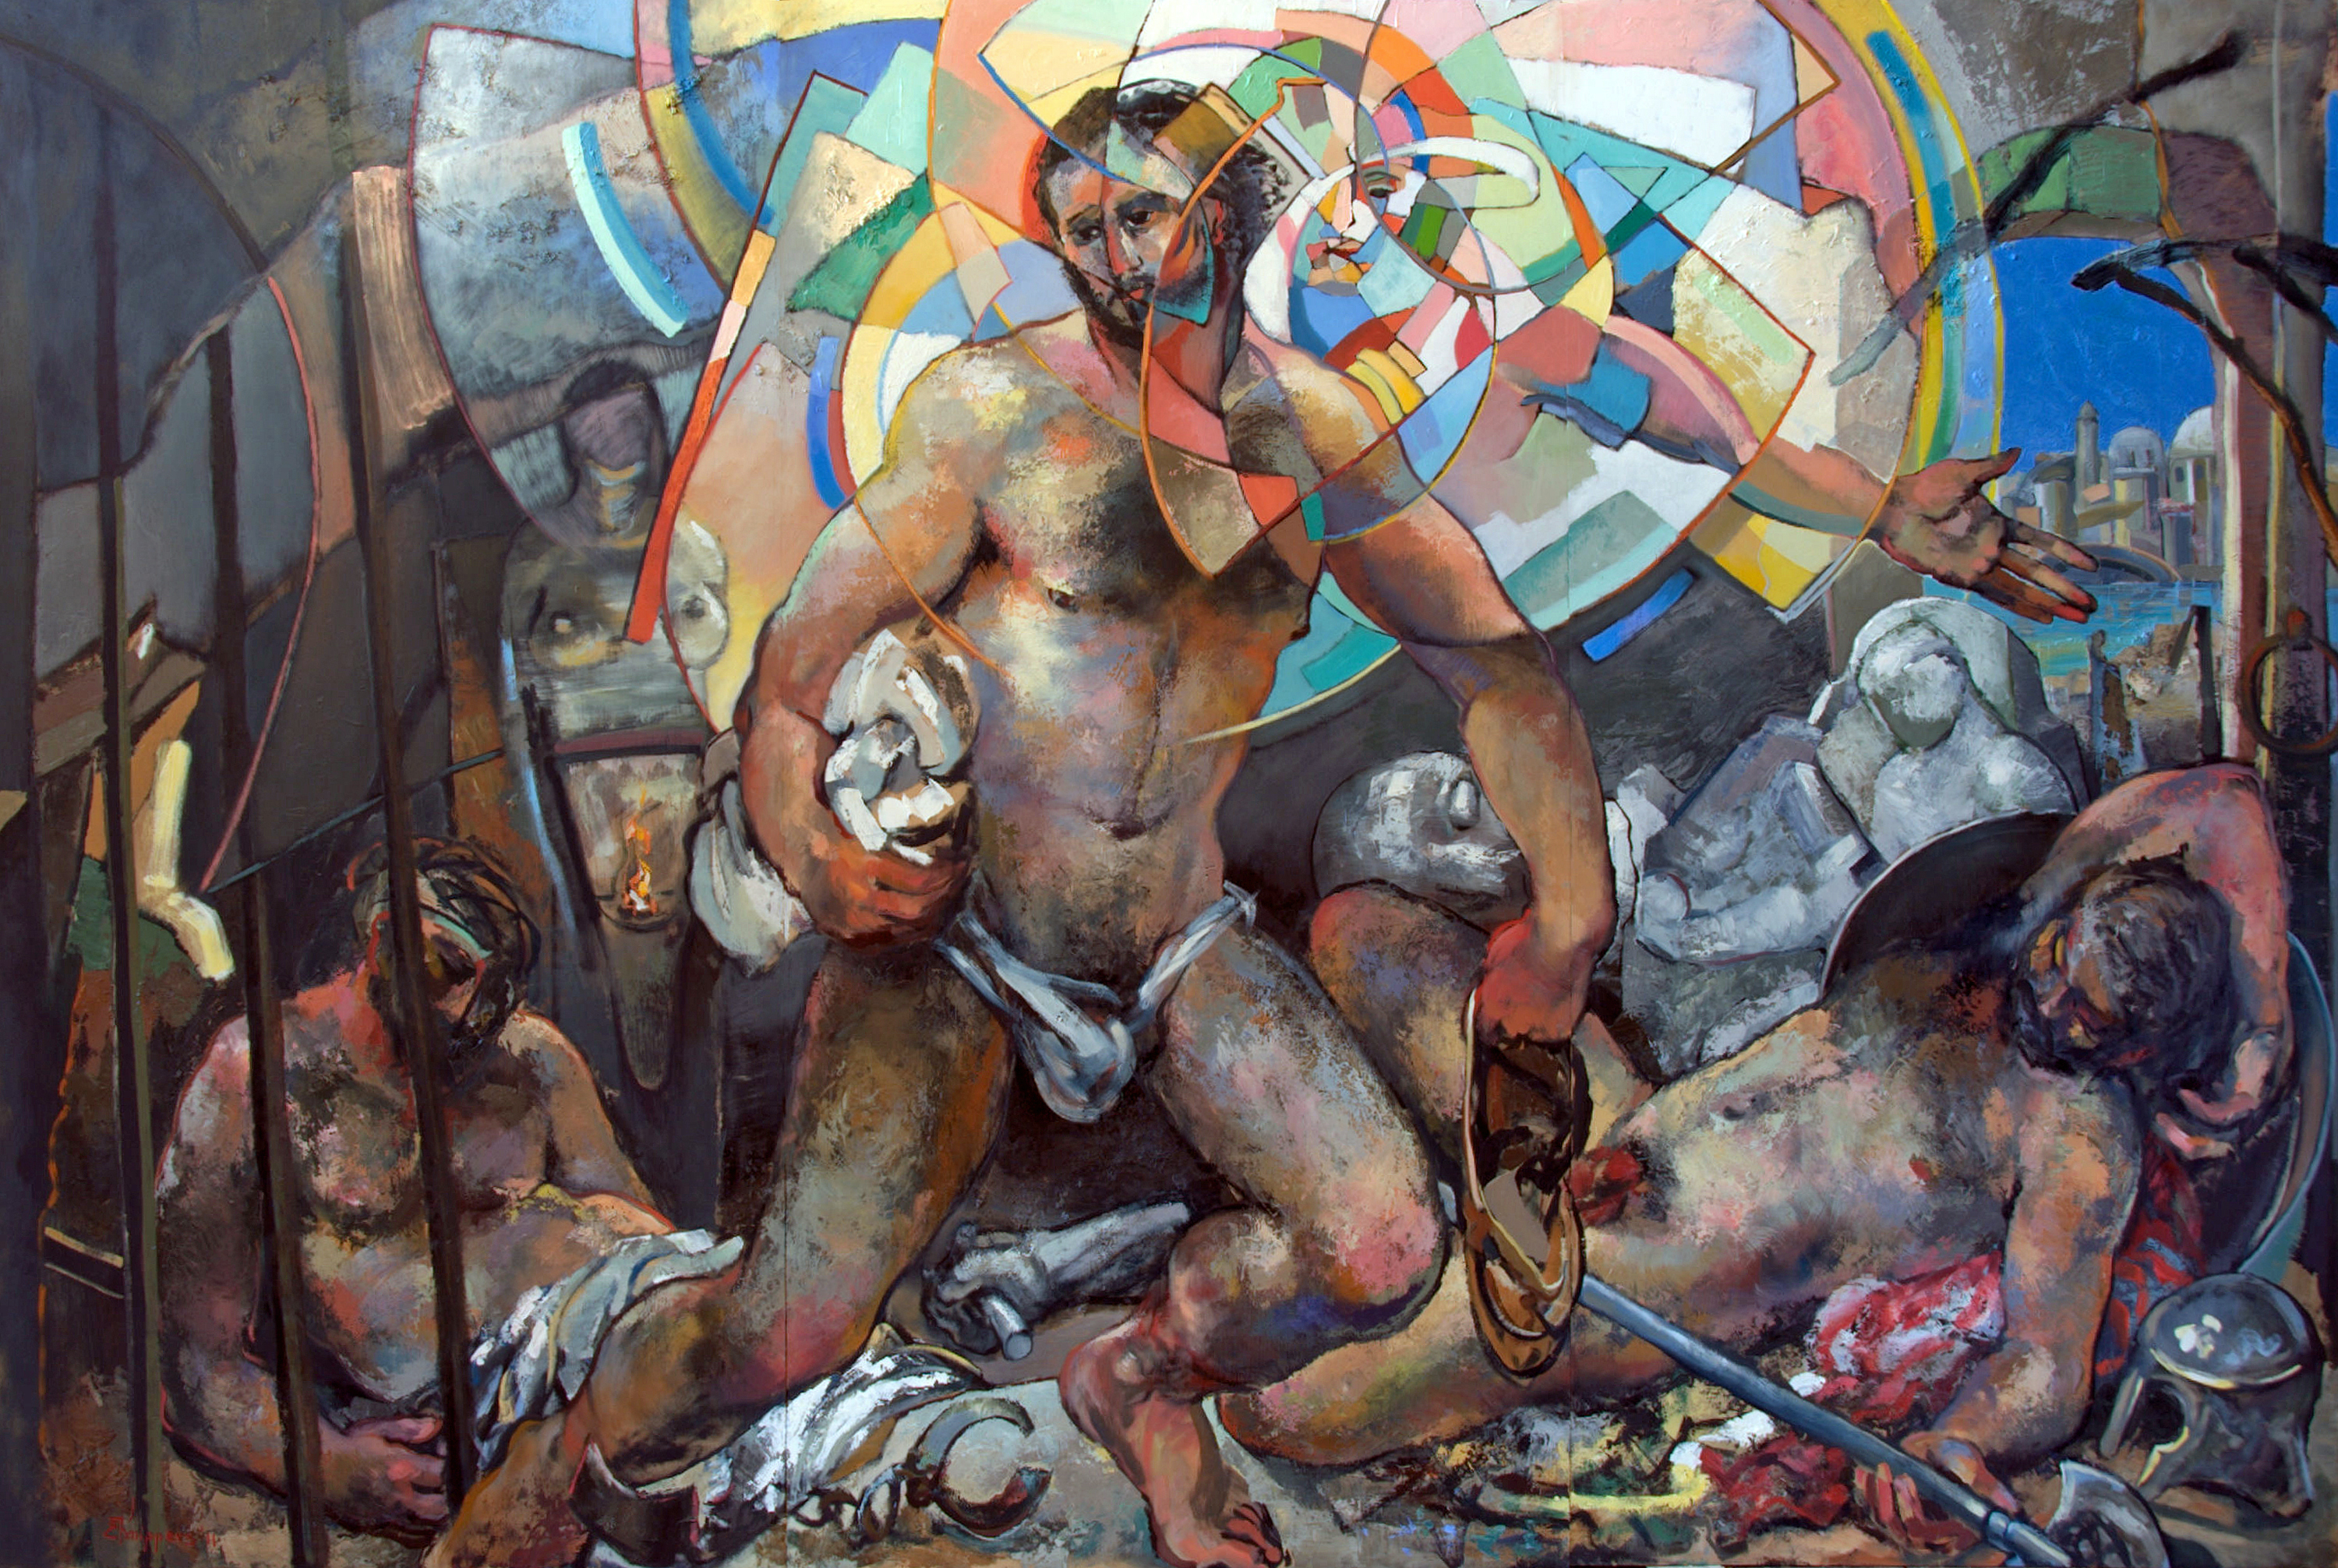 The Dreams of Men (Peter Led From Prison) Oil on panel - 8' X 12' - 2011